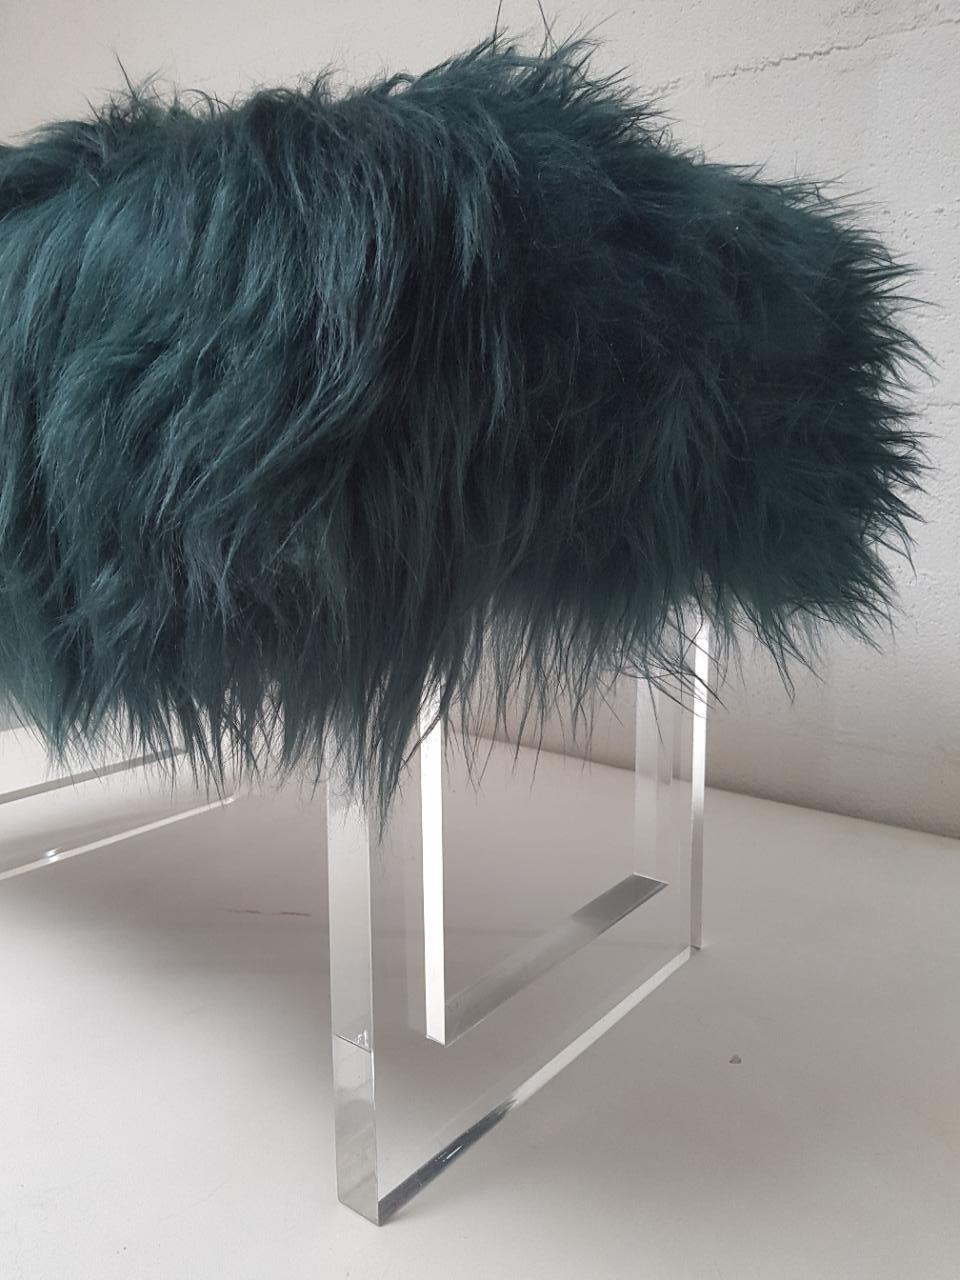 Soft and luxurious sheepskin bench.
Dyed bottle green sheepksin long hairs.
Available in a large range of colors.